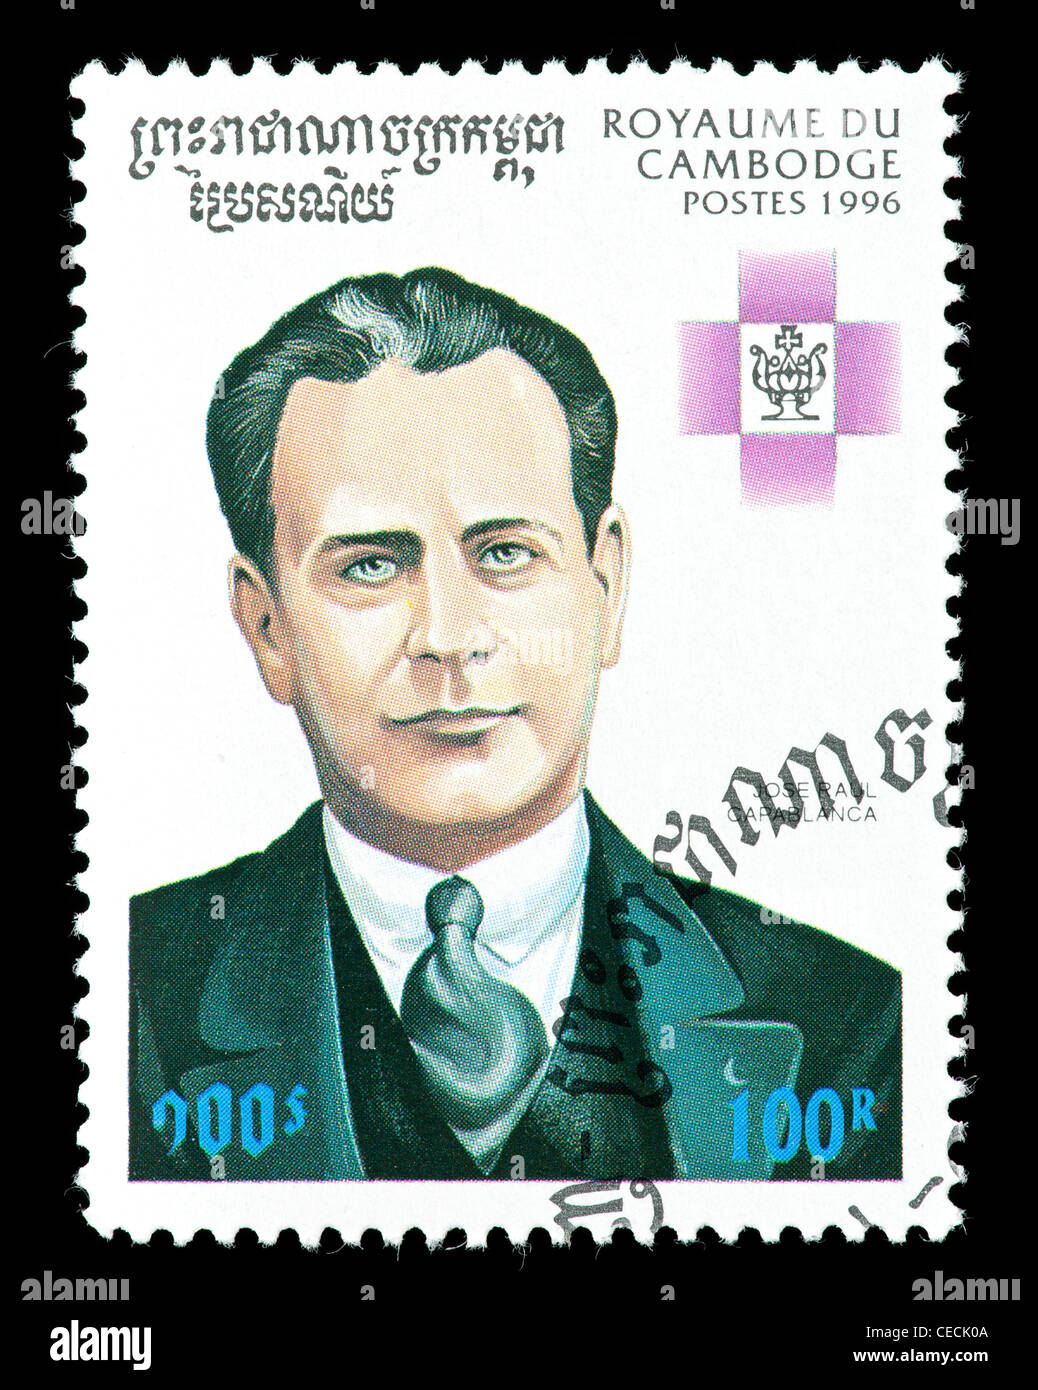 Postage stamp from Cambodia (Kampuchea) depicting Jose Capablance, former world chess champion. Stock Photo